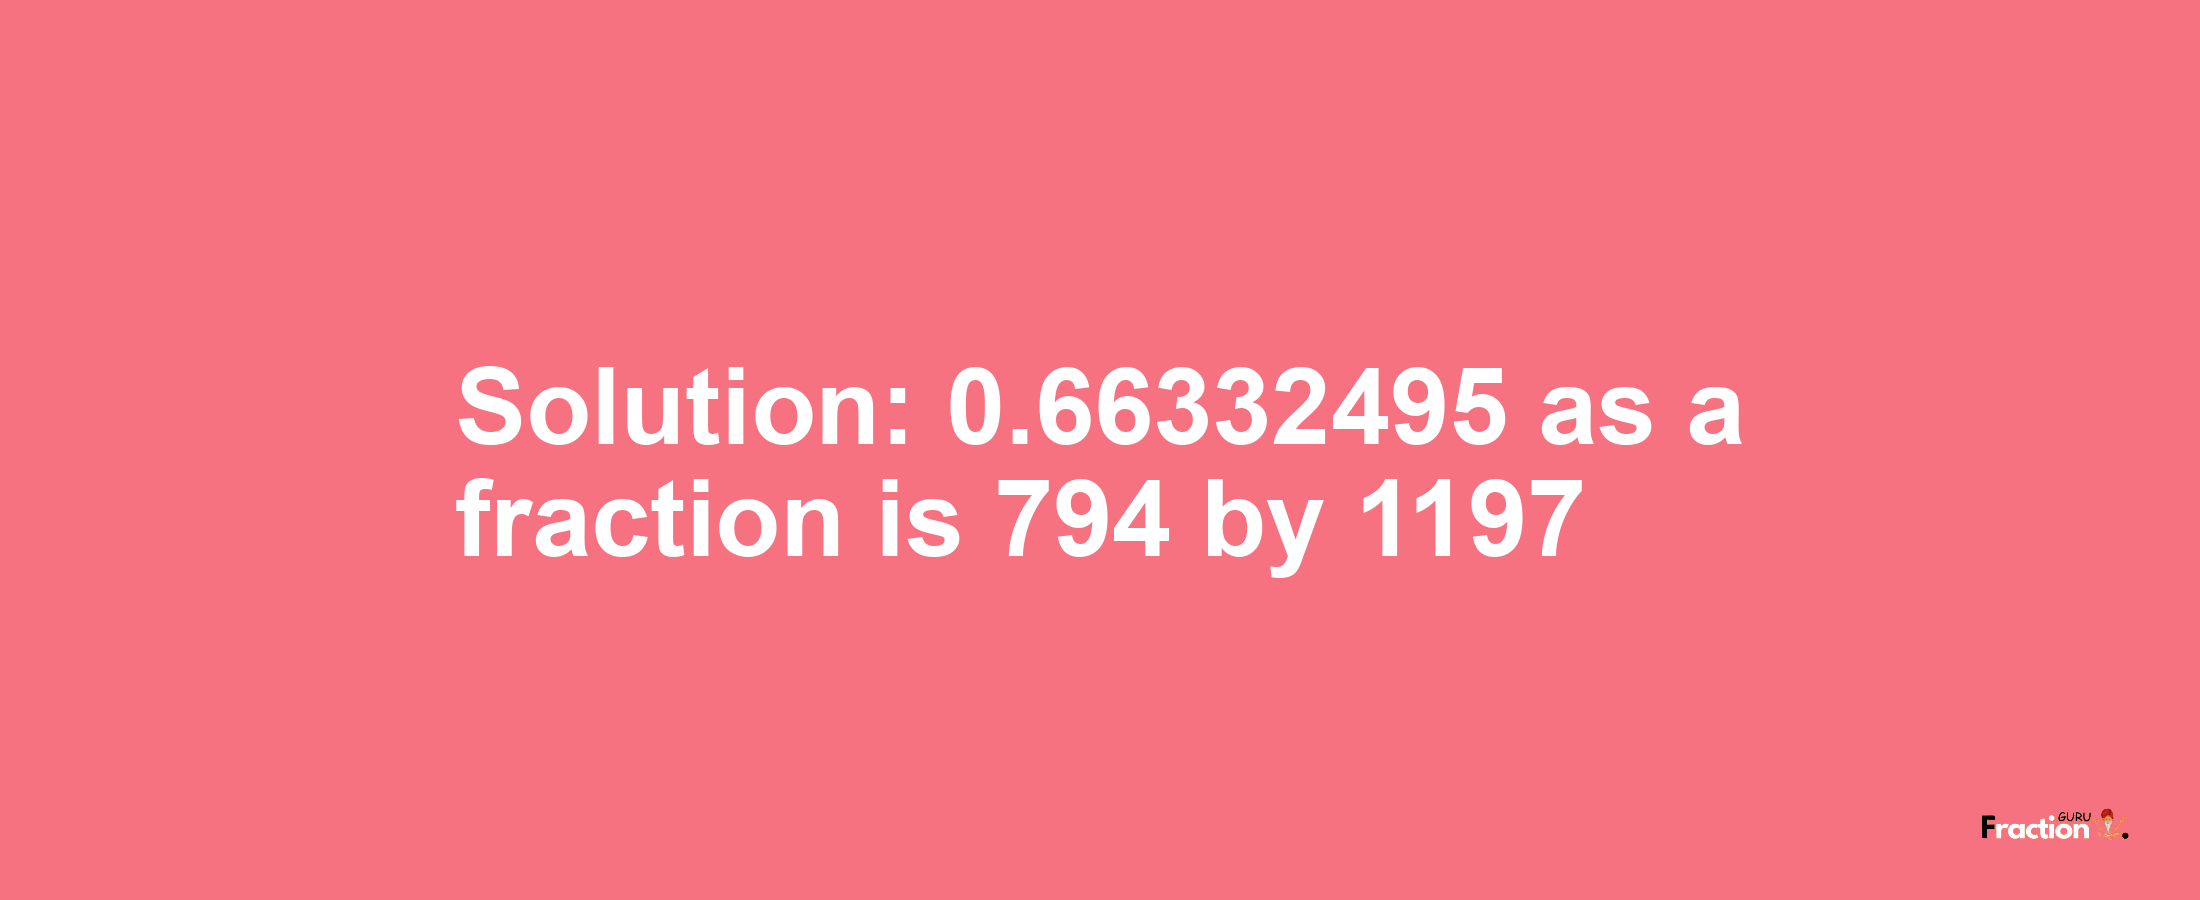 Solution:0.66332495 as a fraction is 794/1197